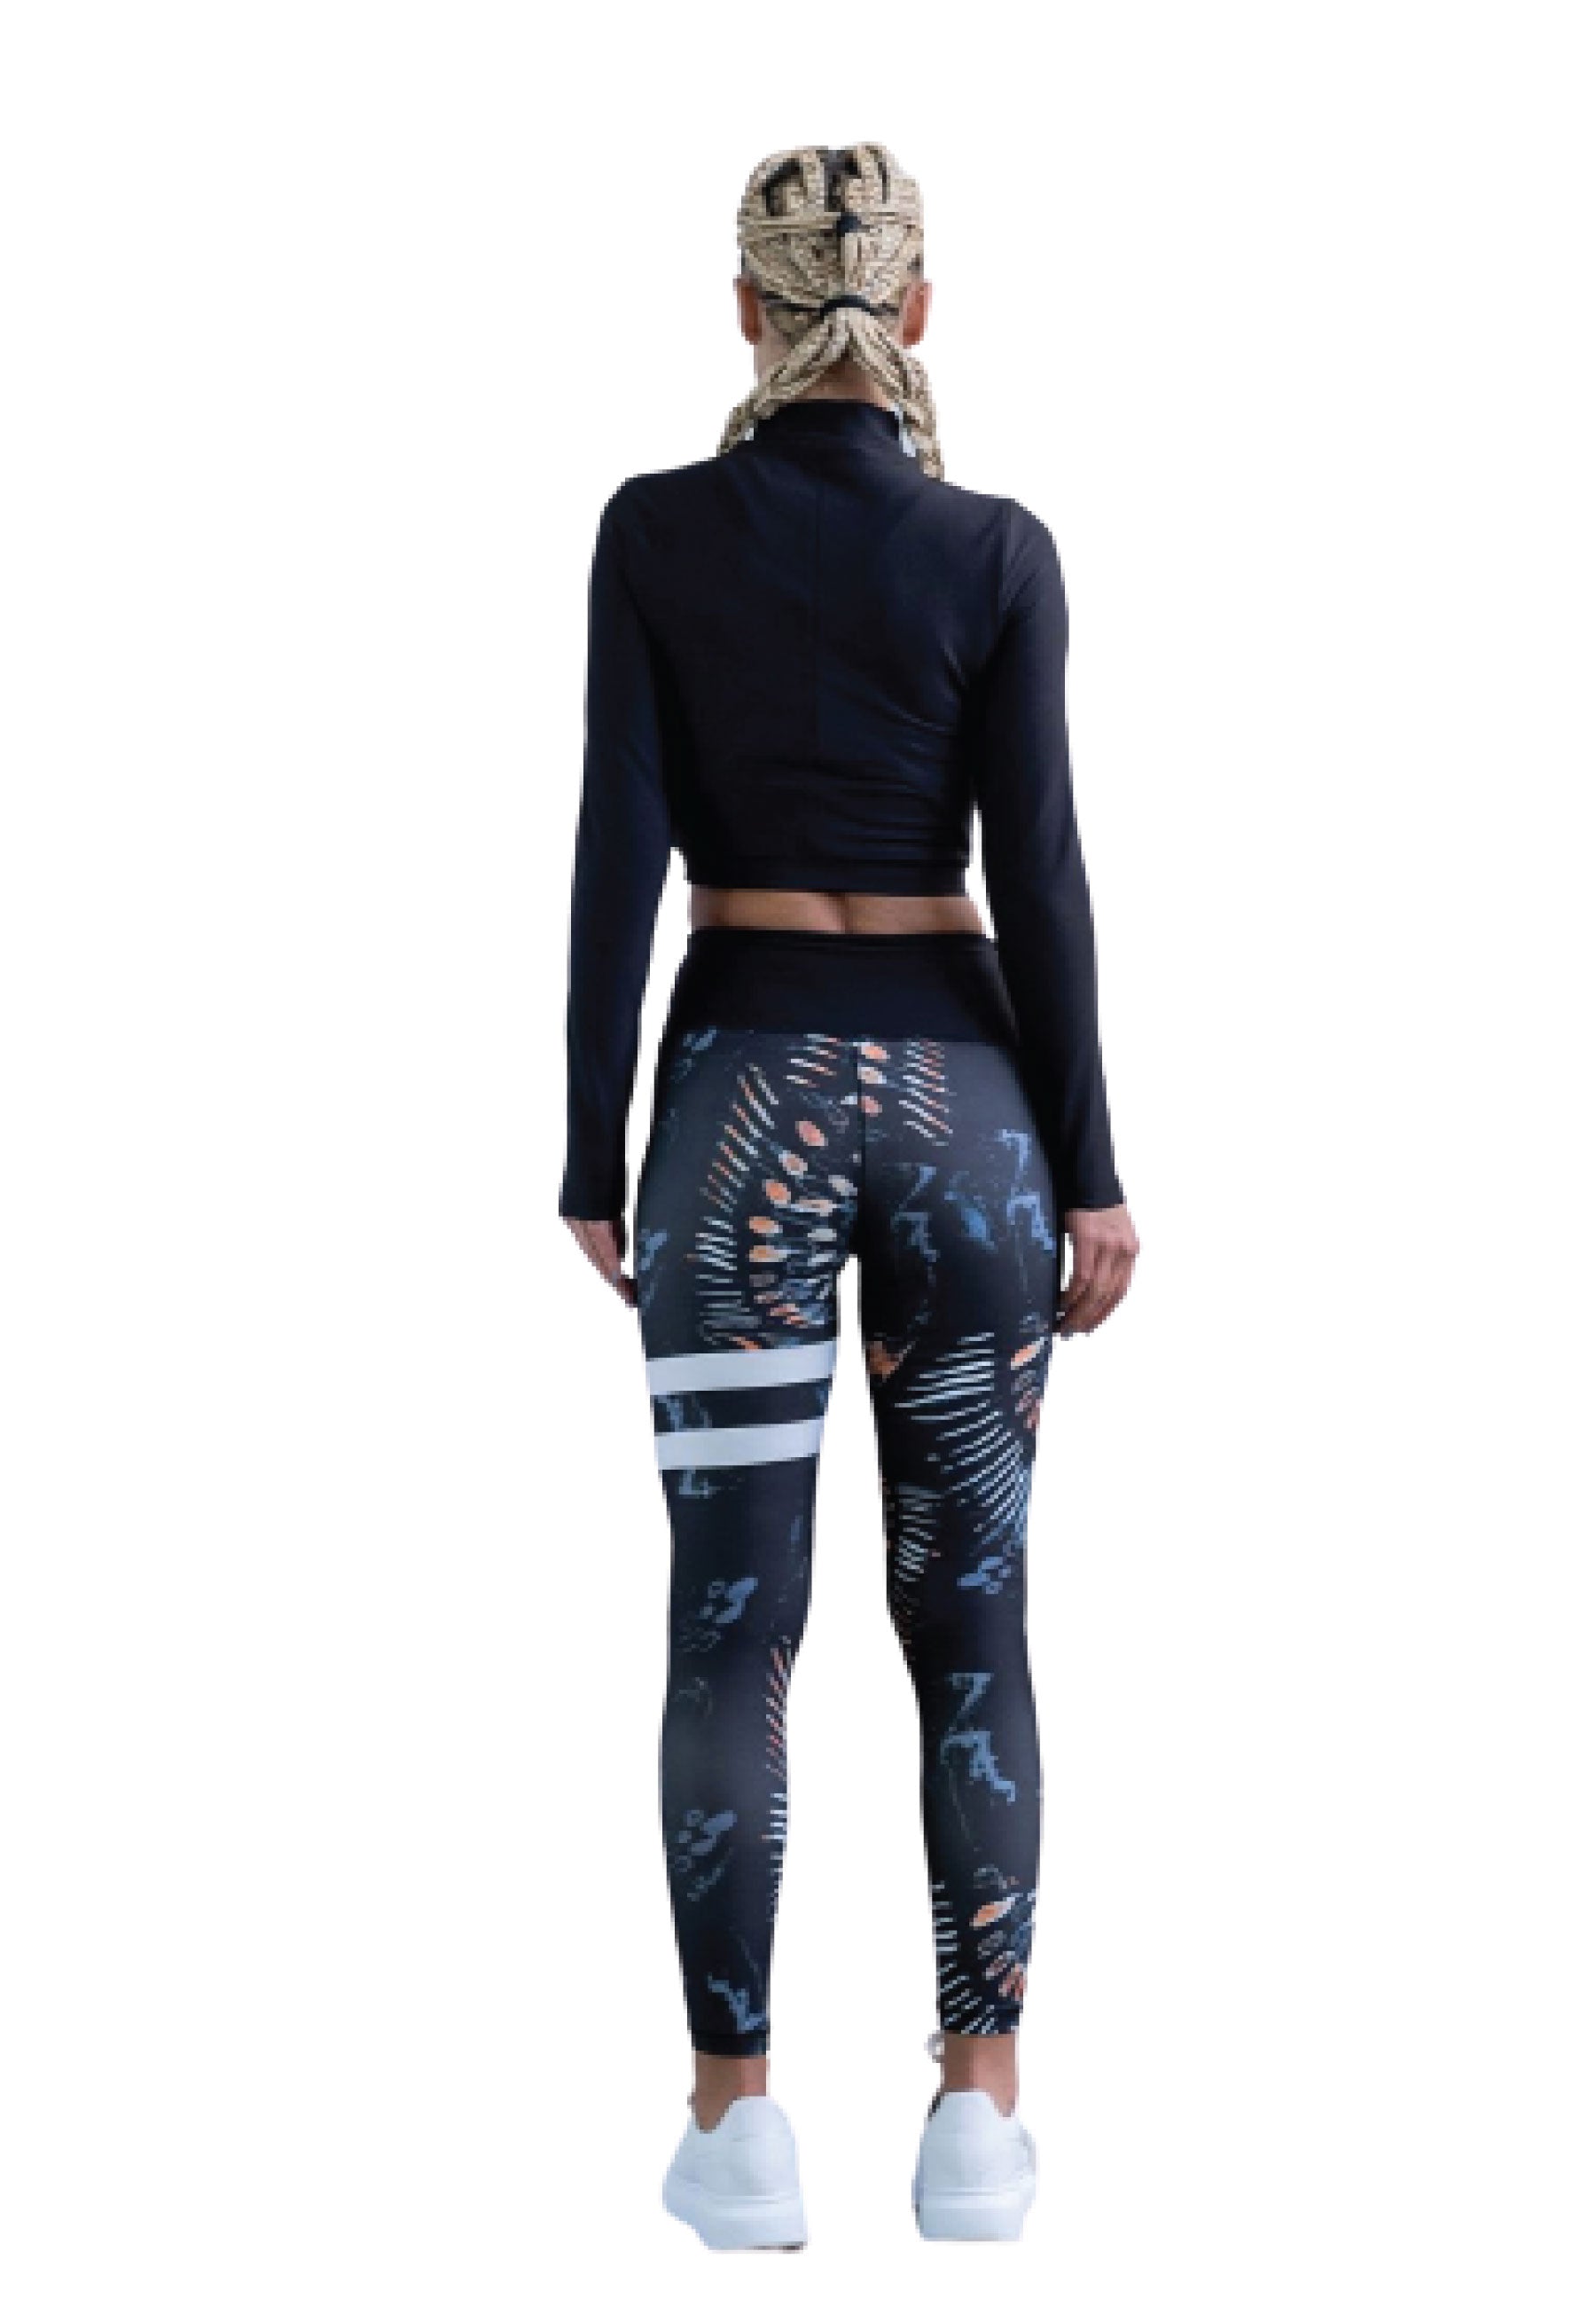 1163 extra high waist leggings in black & blue with stripes